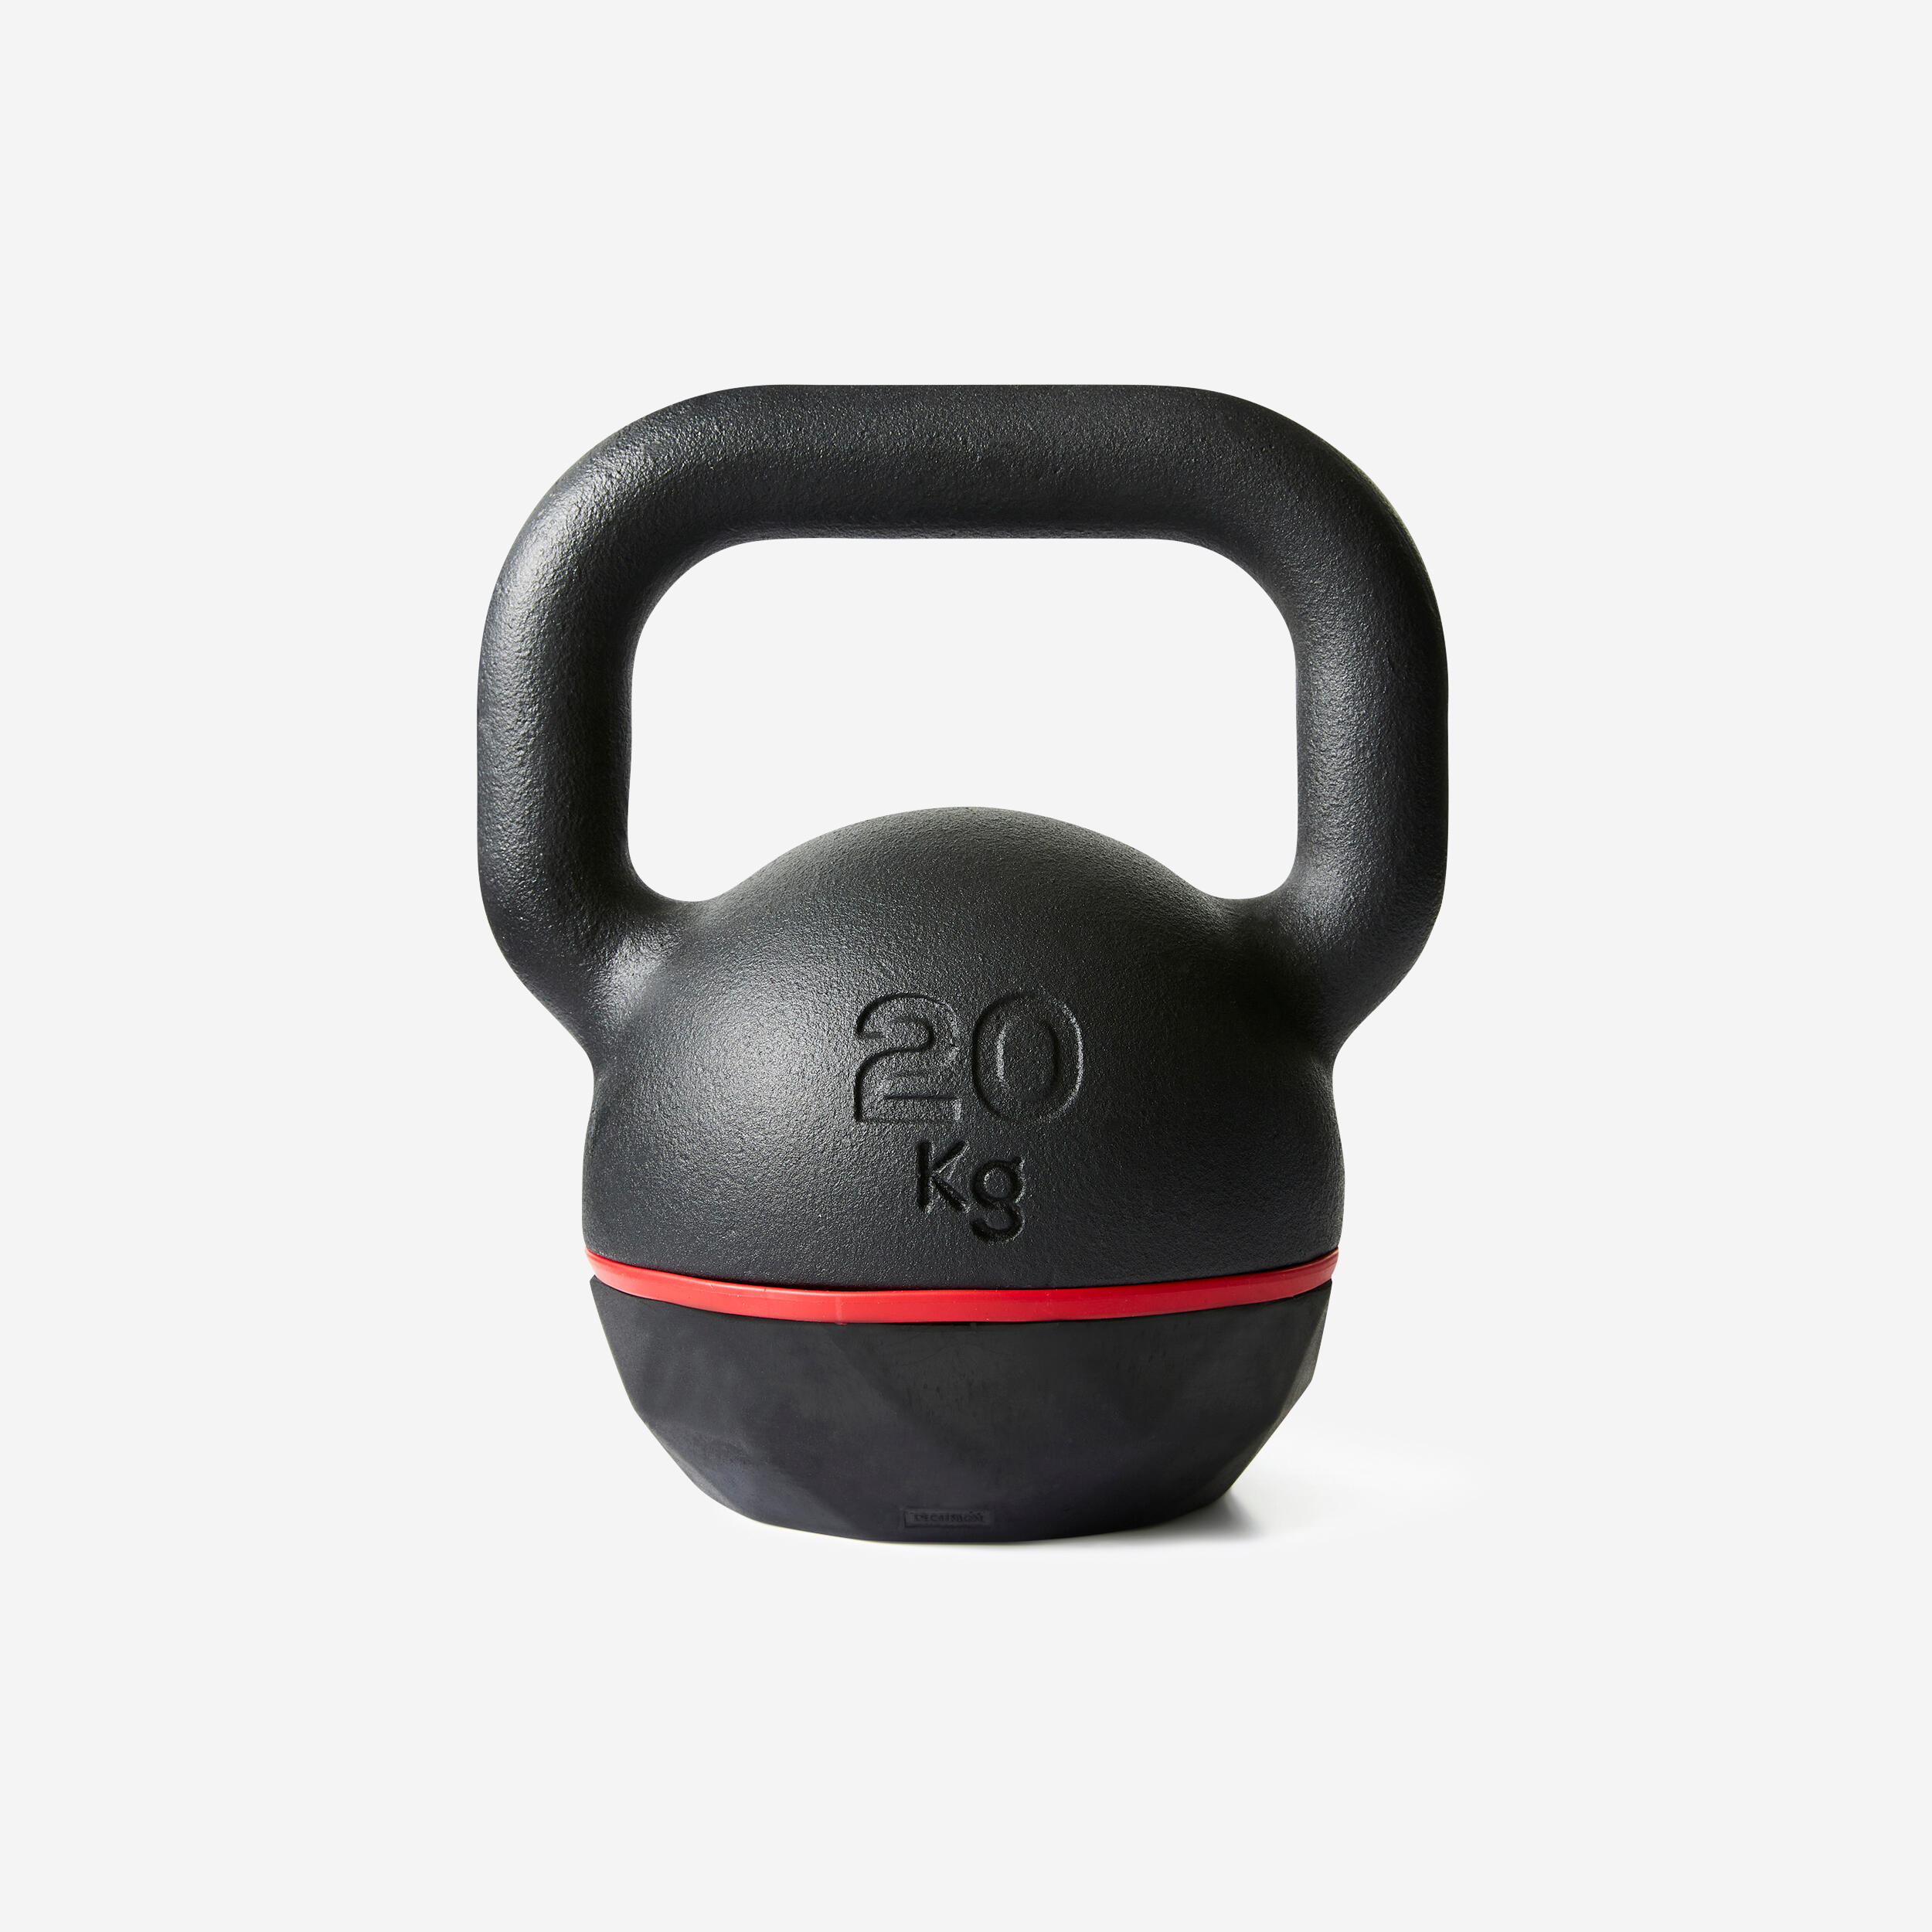 CORENGTH Cast Iron Kettlebell with Rubber Base 20 kg